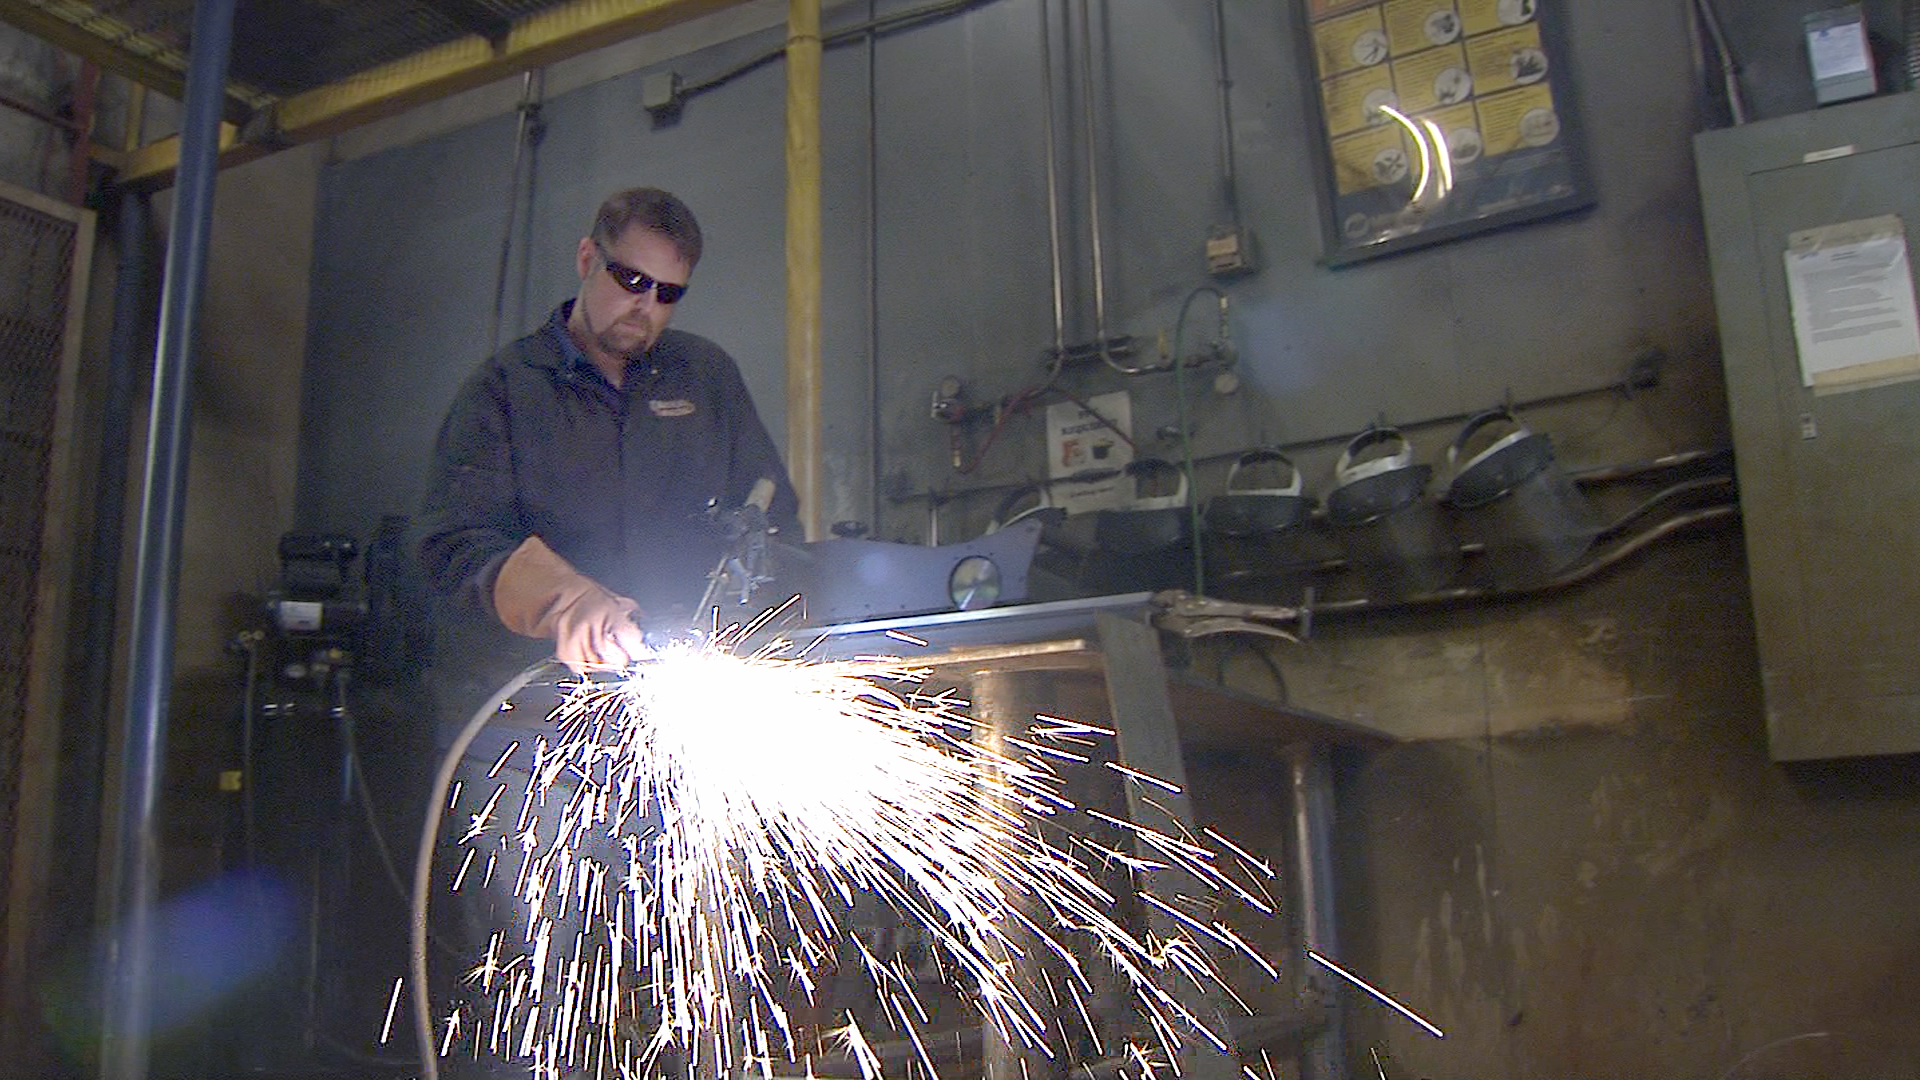 Open Scott Hoad found that he could use GI Bill benefits to learn welding, putting him on course for a new career.